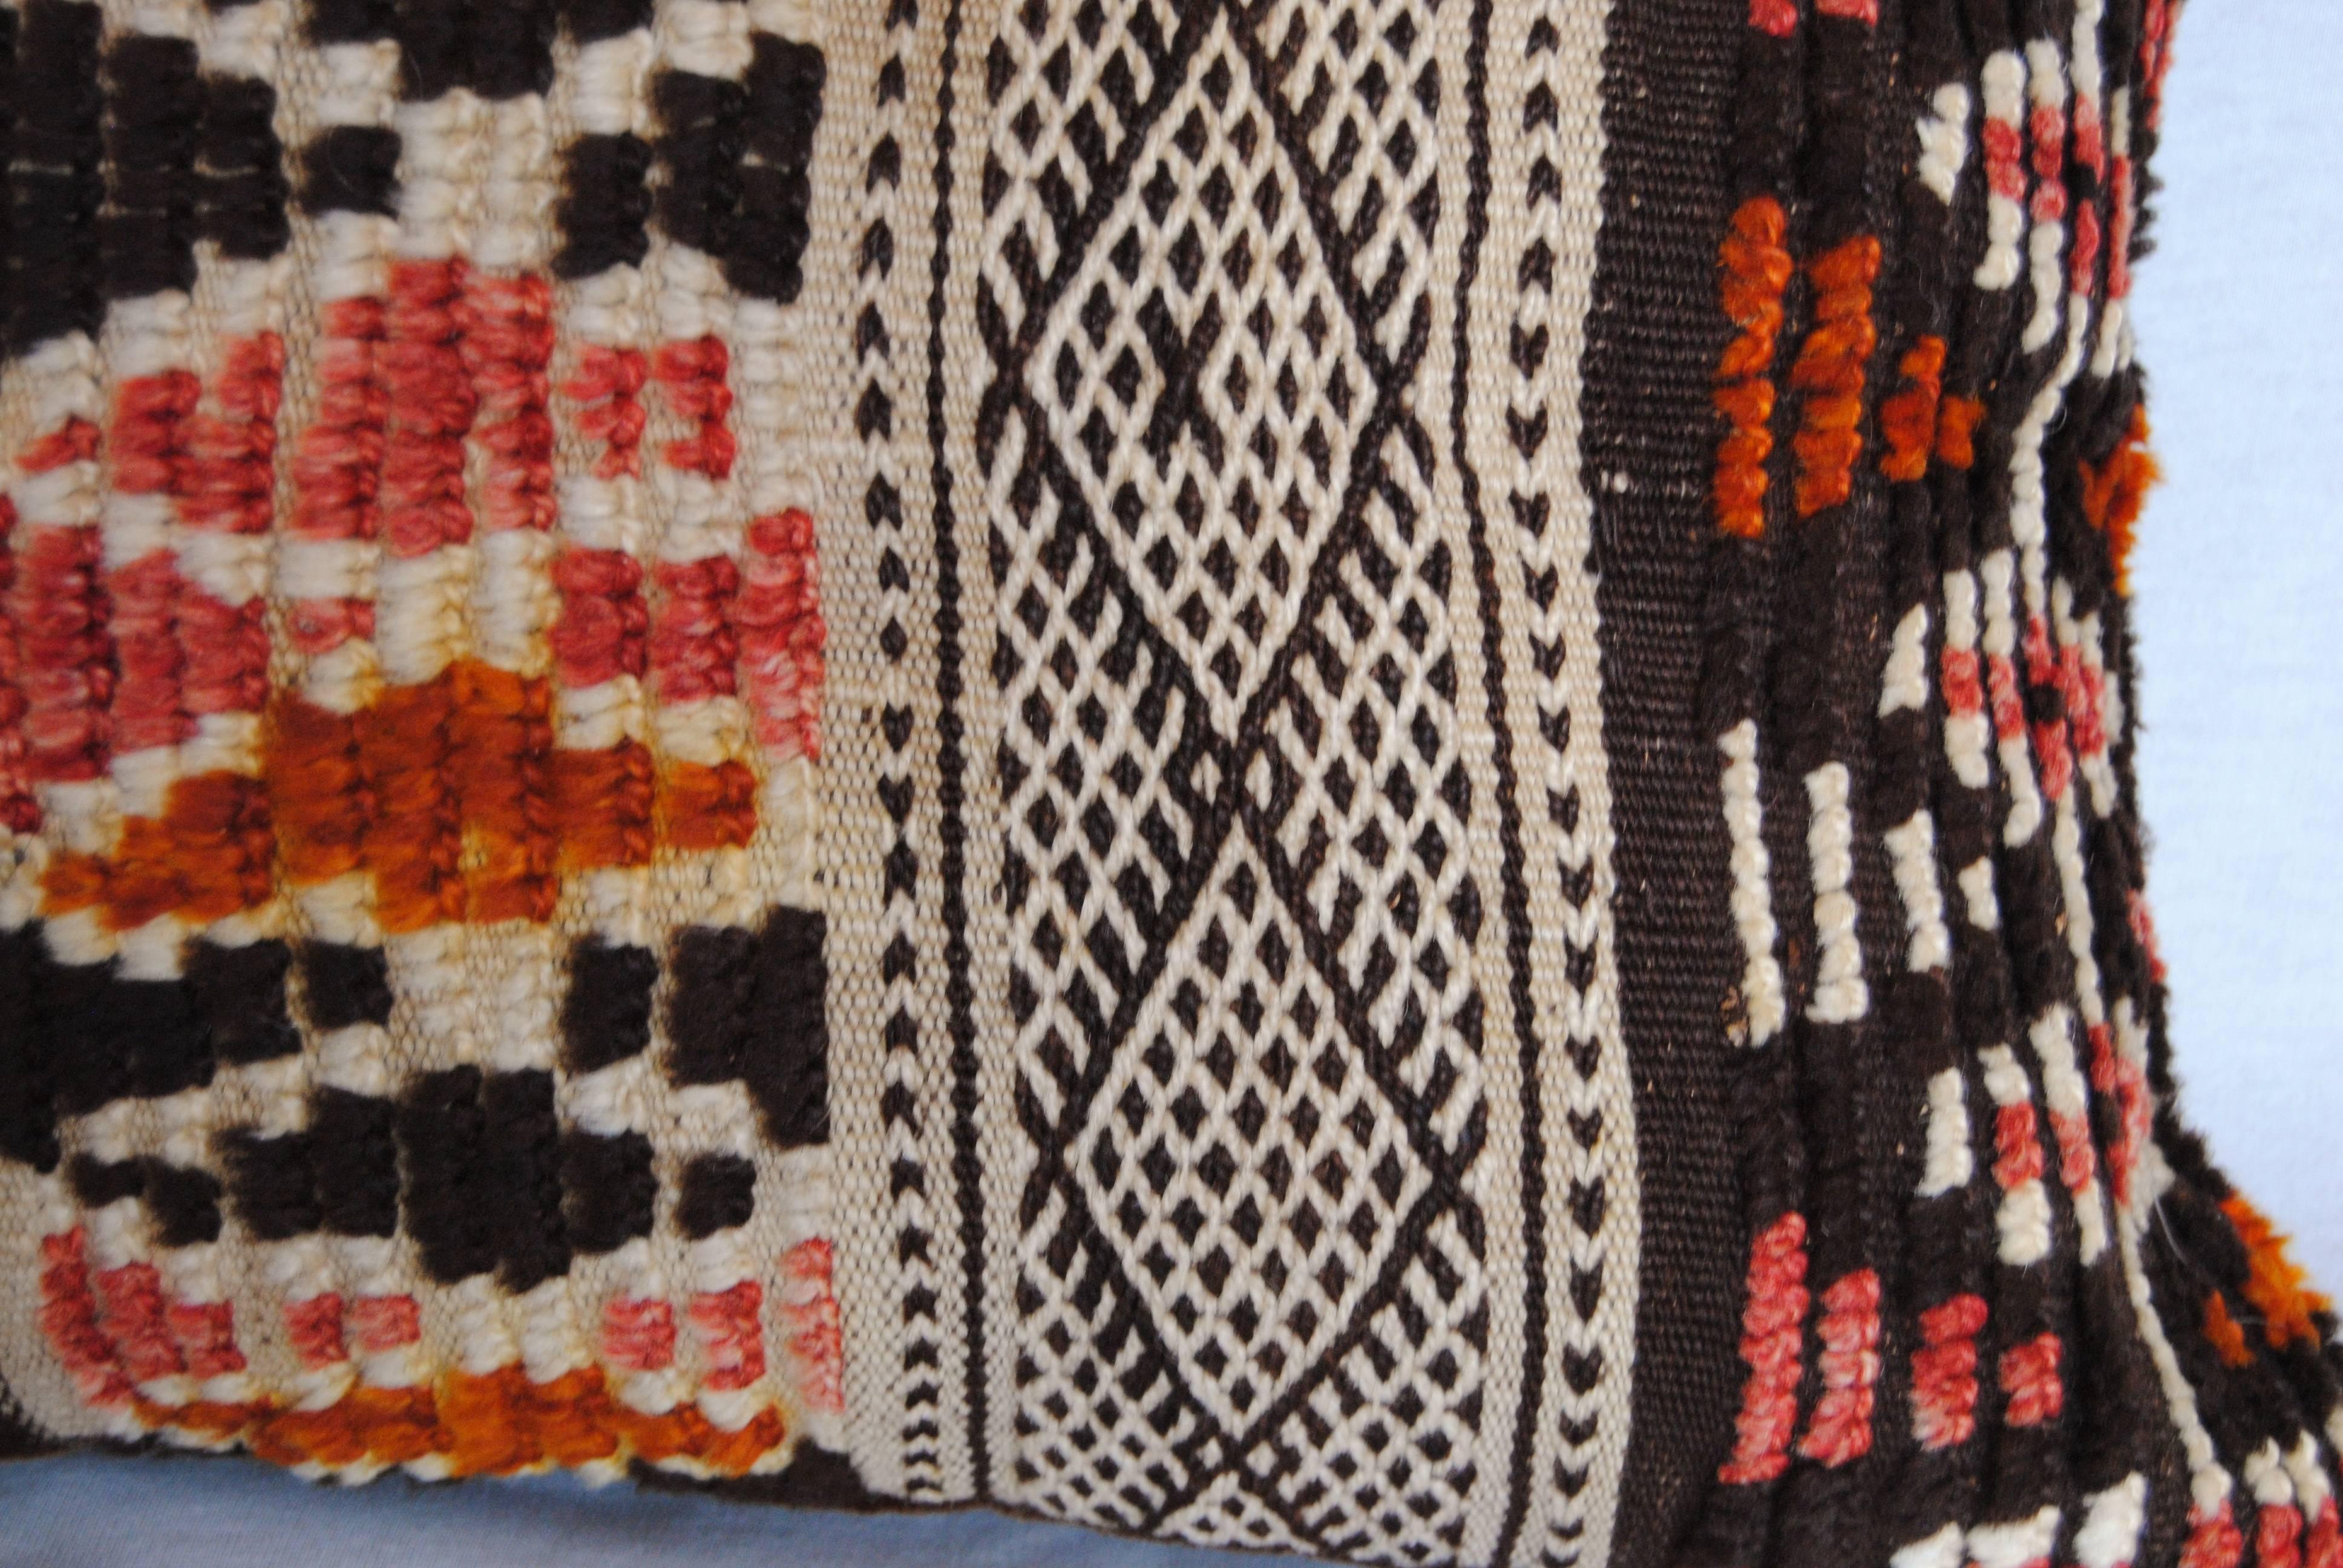 Custom pillow cut from a vintage hand loomed wool Moroccan Berber rug from the Atlas Mountains.  Flat weave stripes are embellished with raised wool tufting in tribal designs.  Wool is soft and lustrous with good natural color.  Pillow is backed in